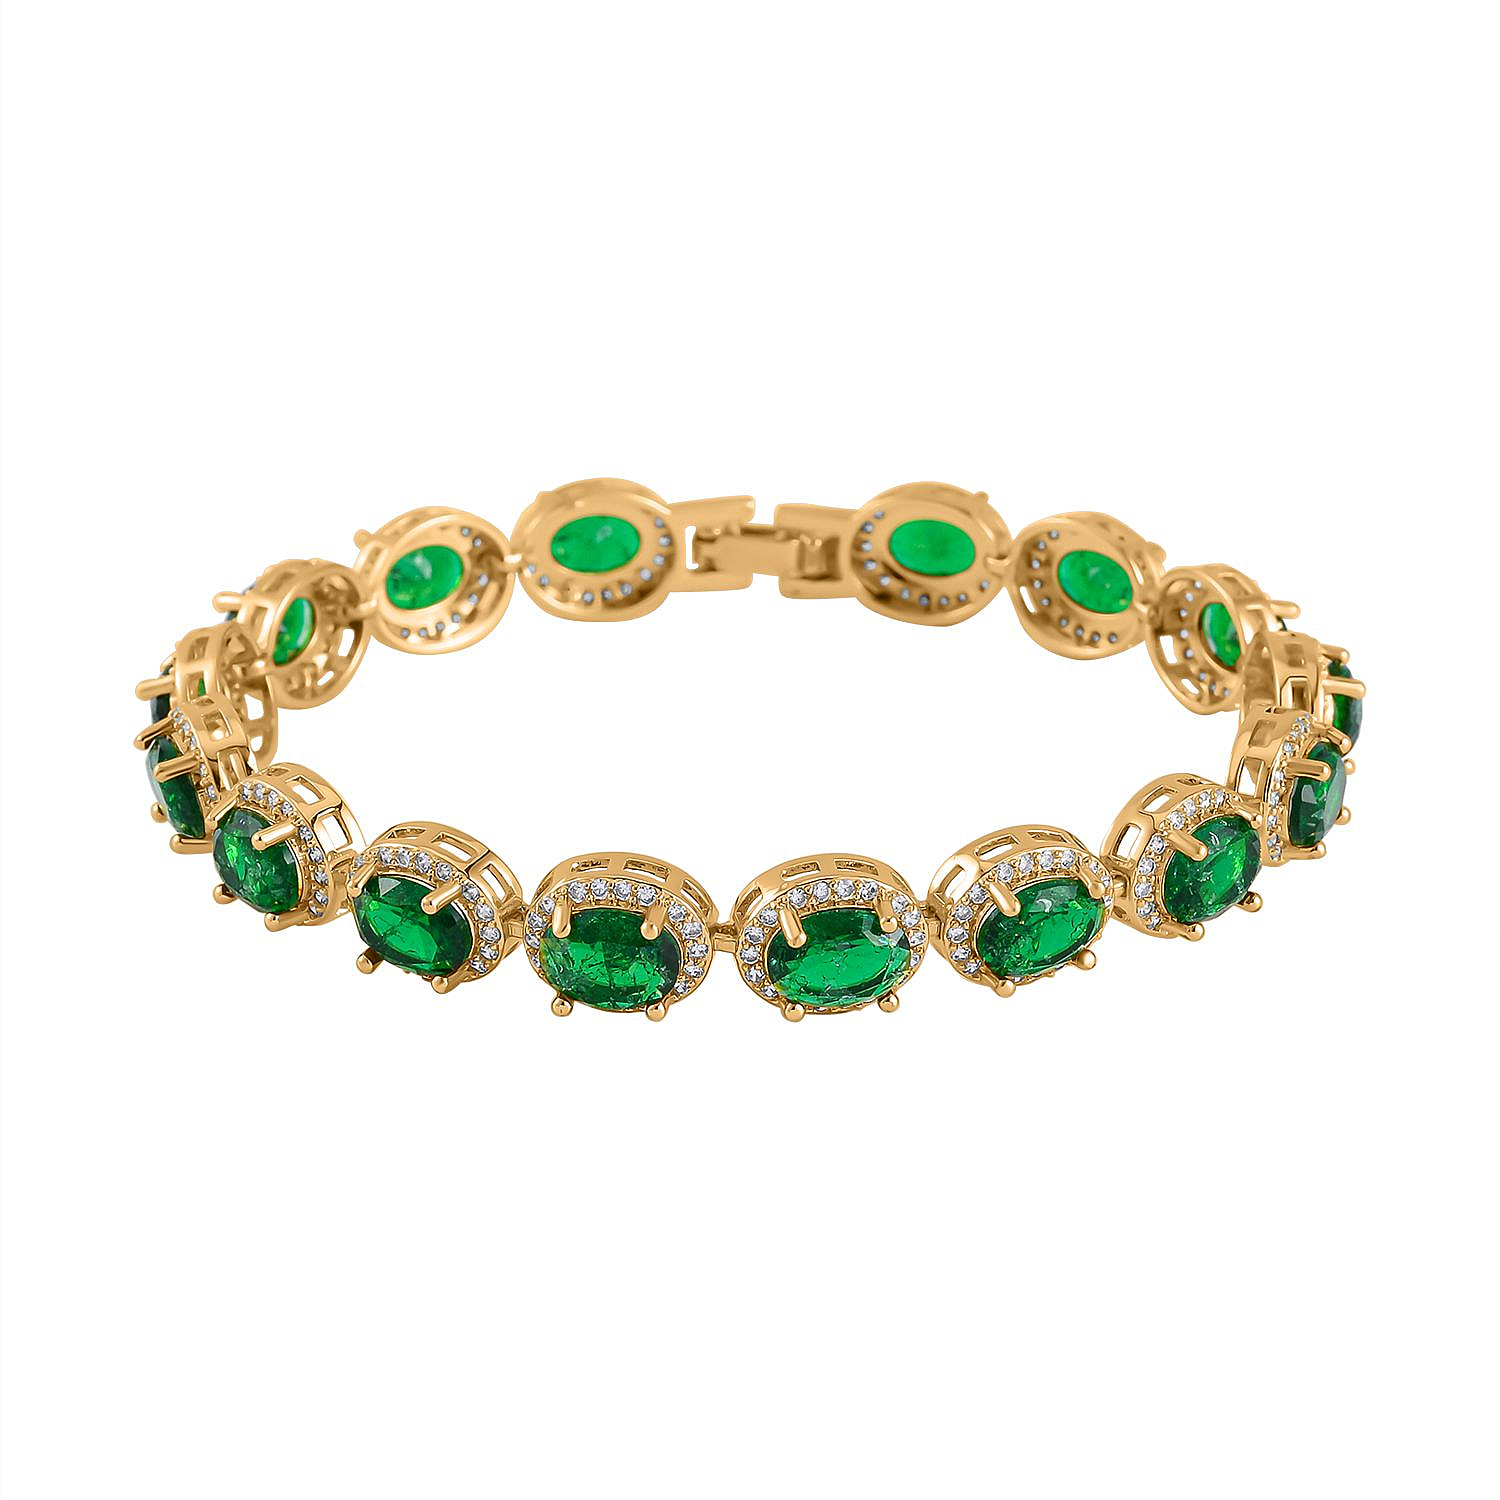 One Time Closeout - Simulated Chrome Diopside & Simulated Diamond Tennis Bracelet (Size - 7.5) in Yellow Gold Tone